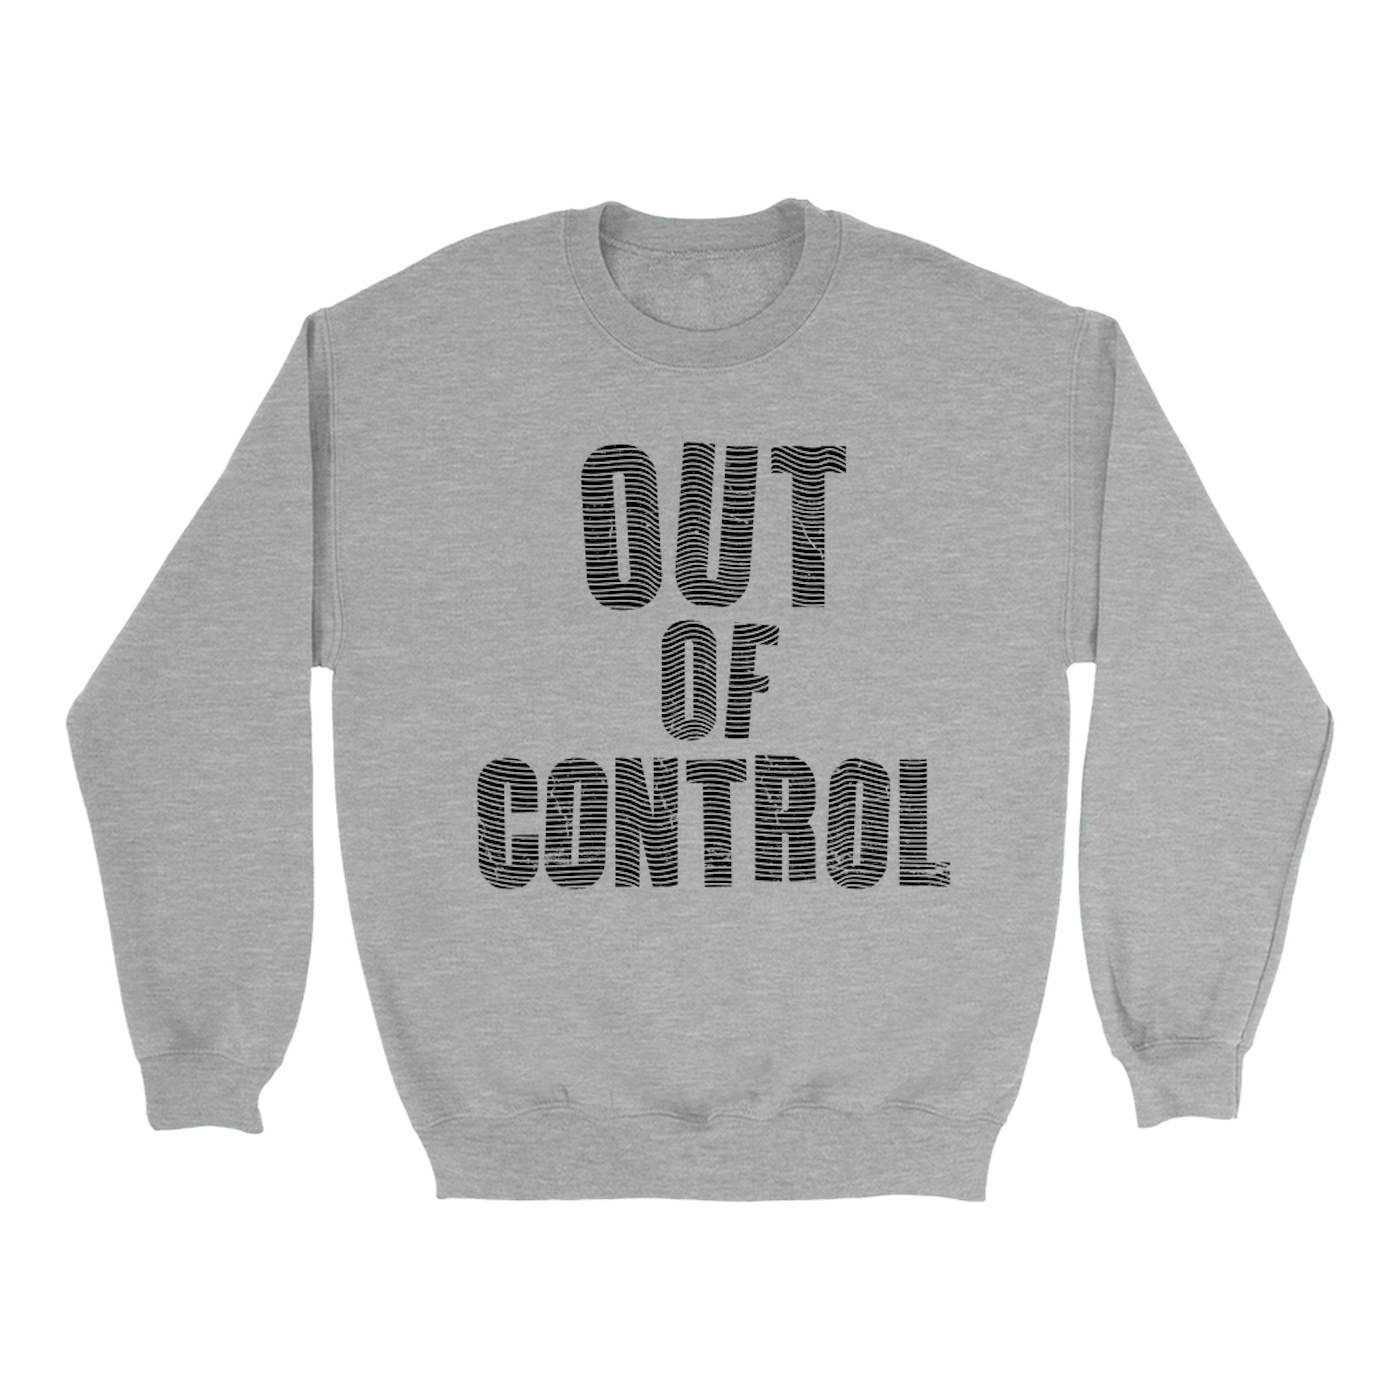 The Clash Sweatshirt | Out Of Control Worn By Joe Stummer The Clash Sweatshirt